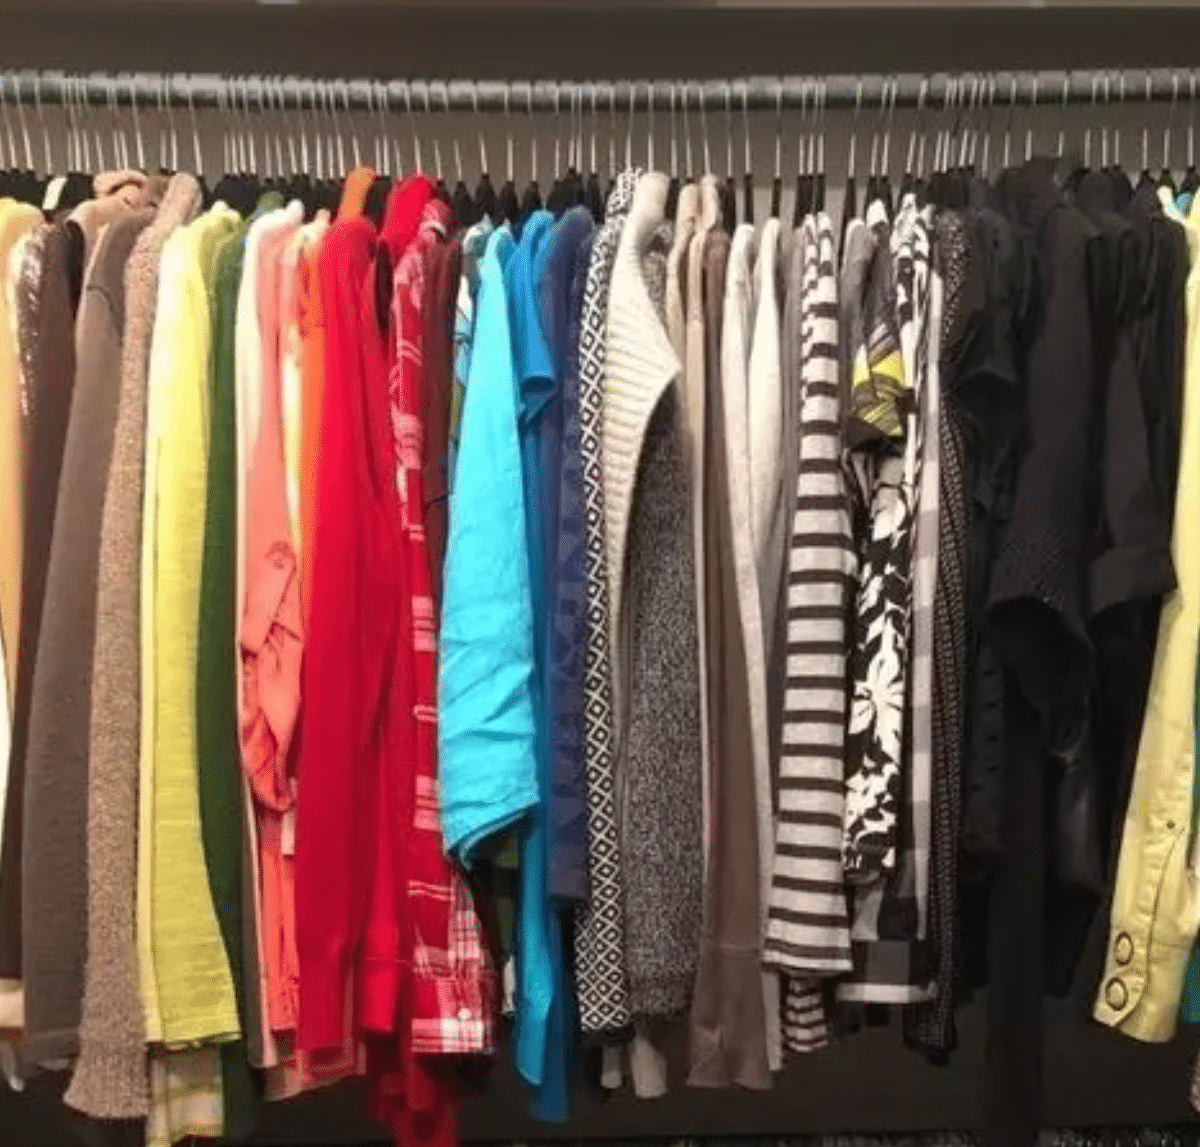 organized closet with hanging clothes